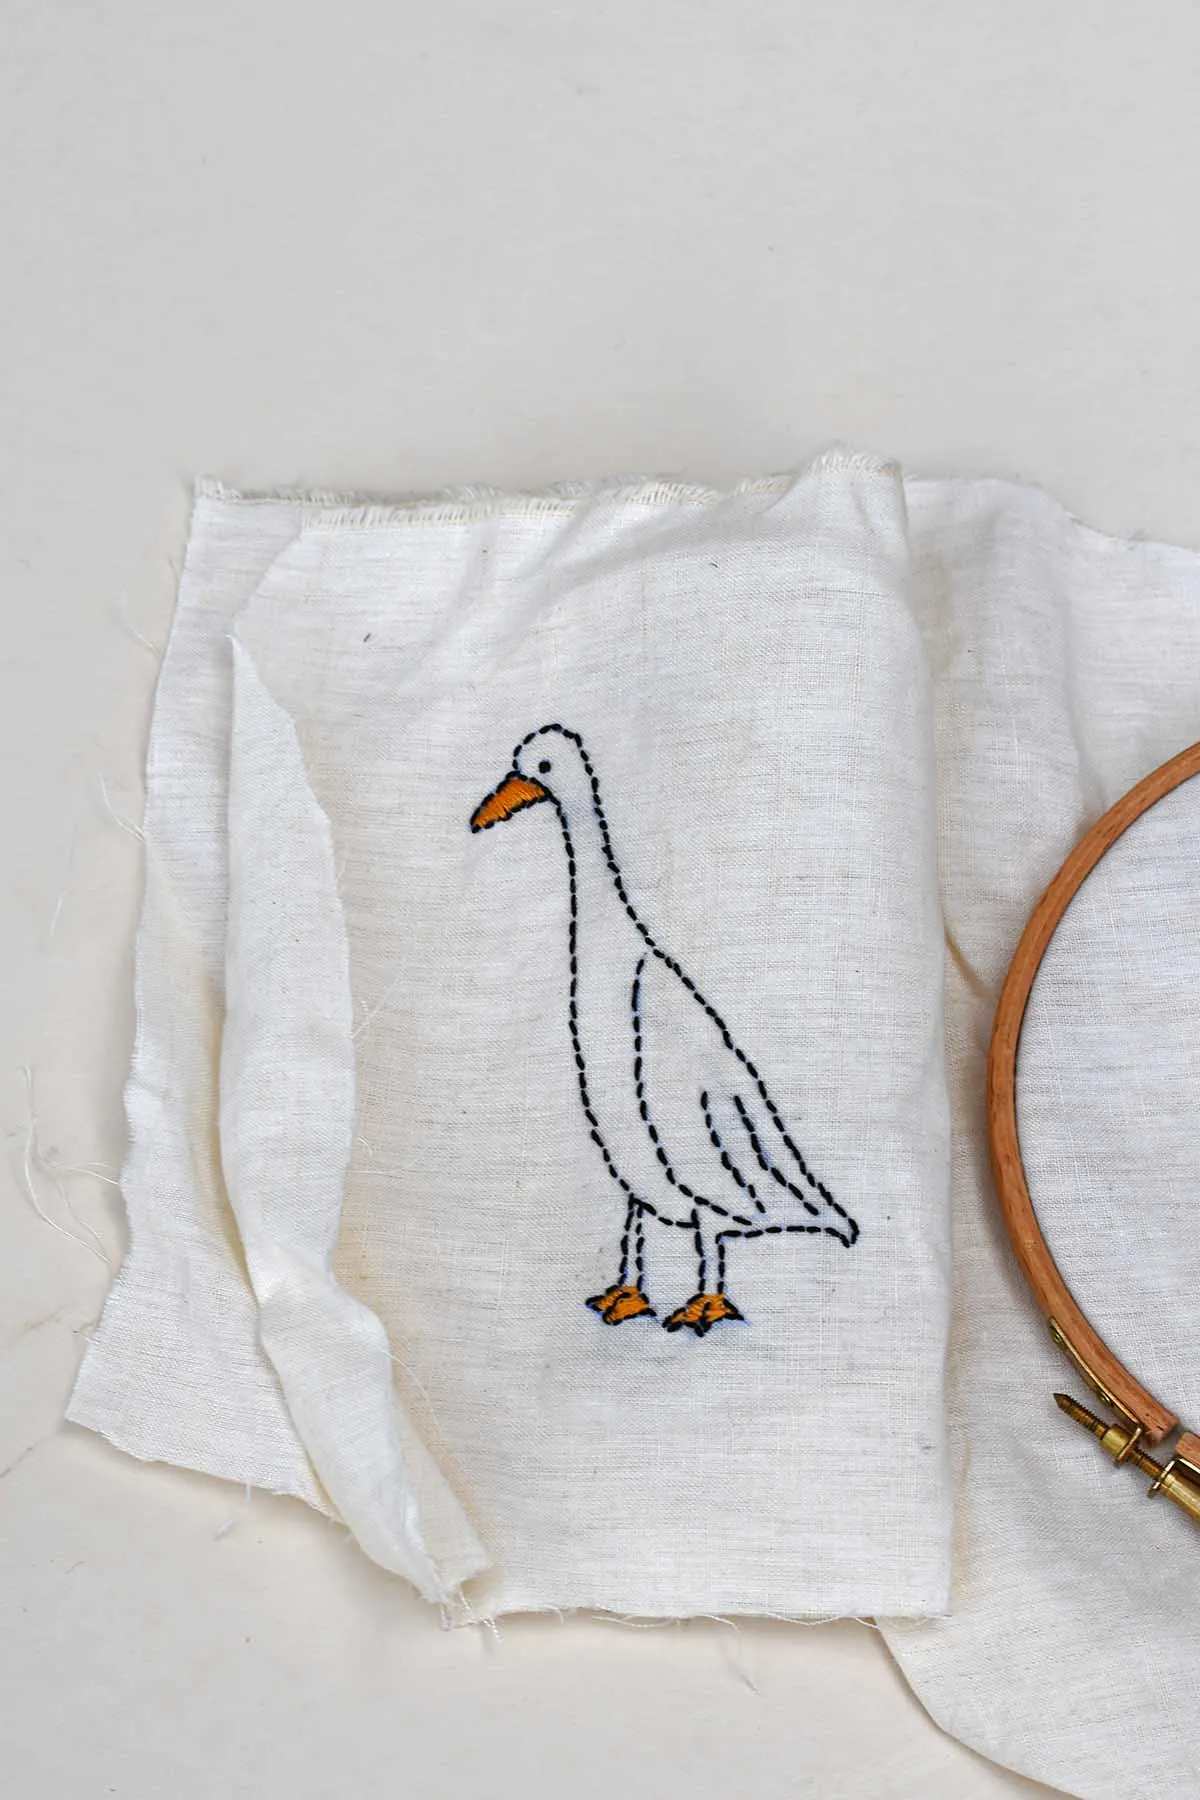 finished-duck-embroidery-Pm.jpg